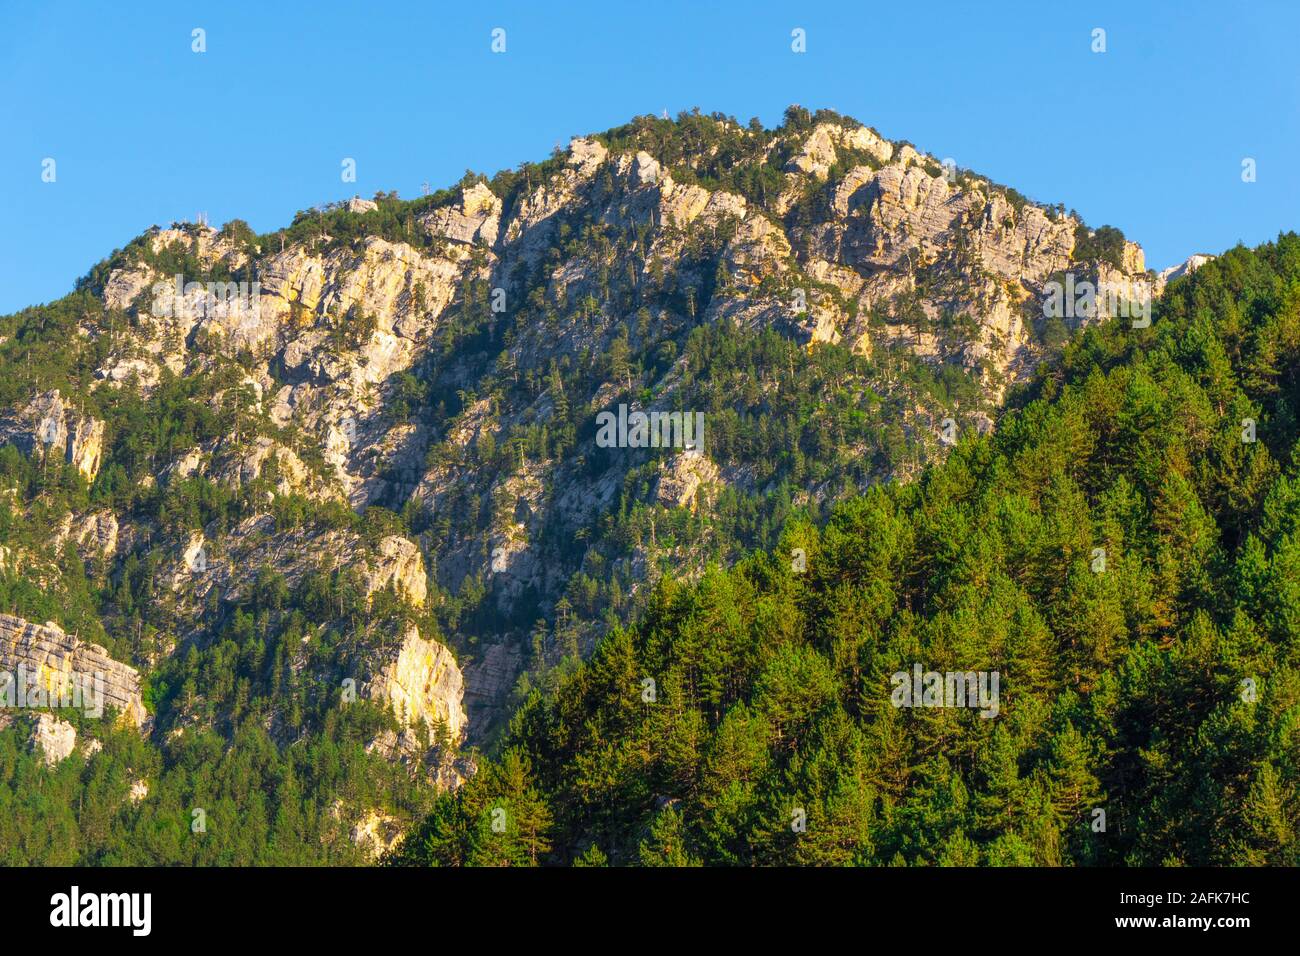 Rocks and trees against the sky in Greece horizontal Stock Photo